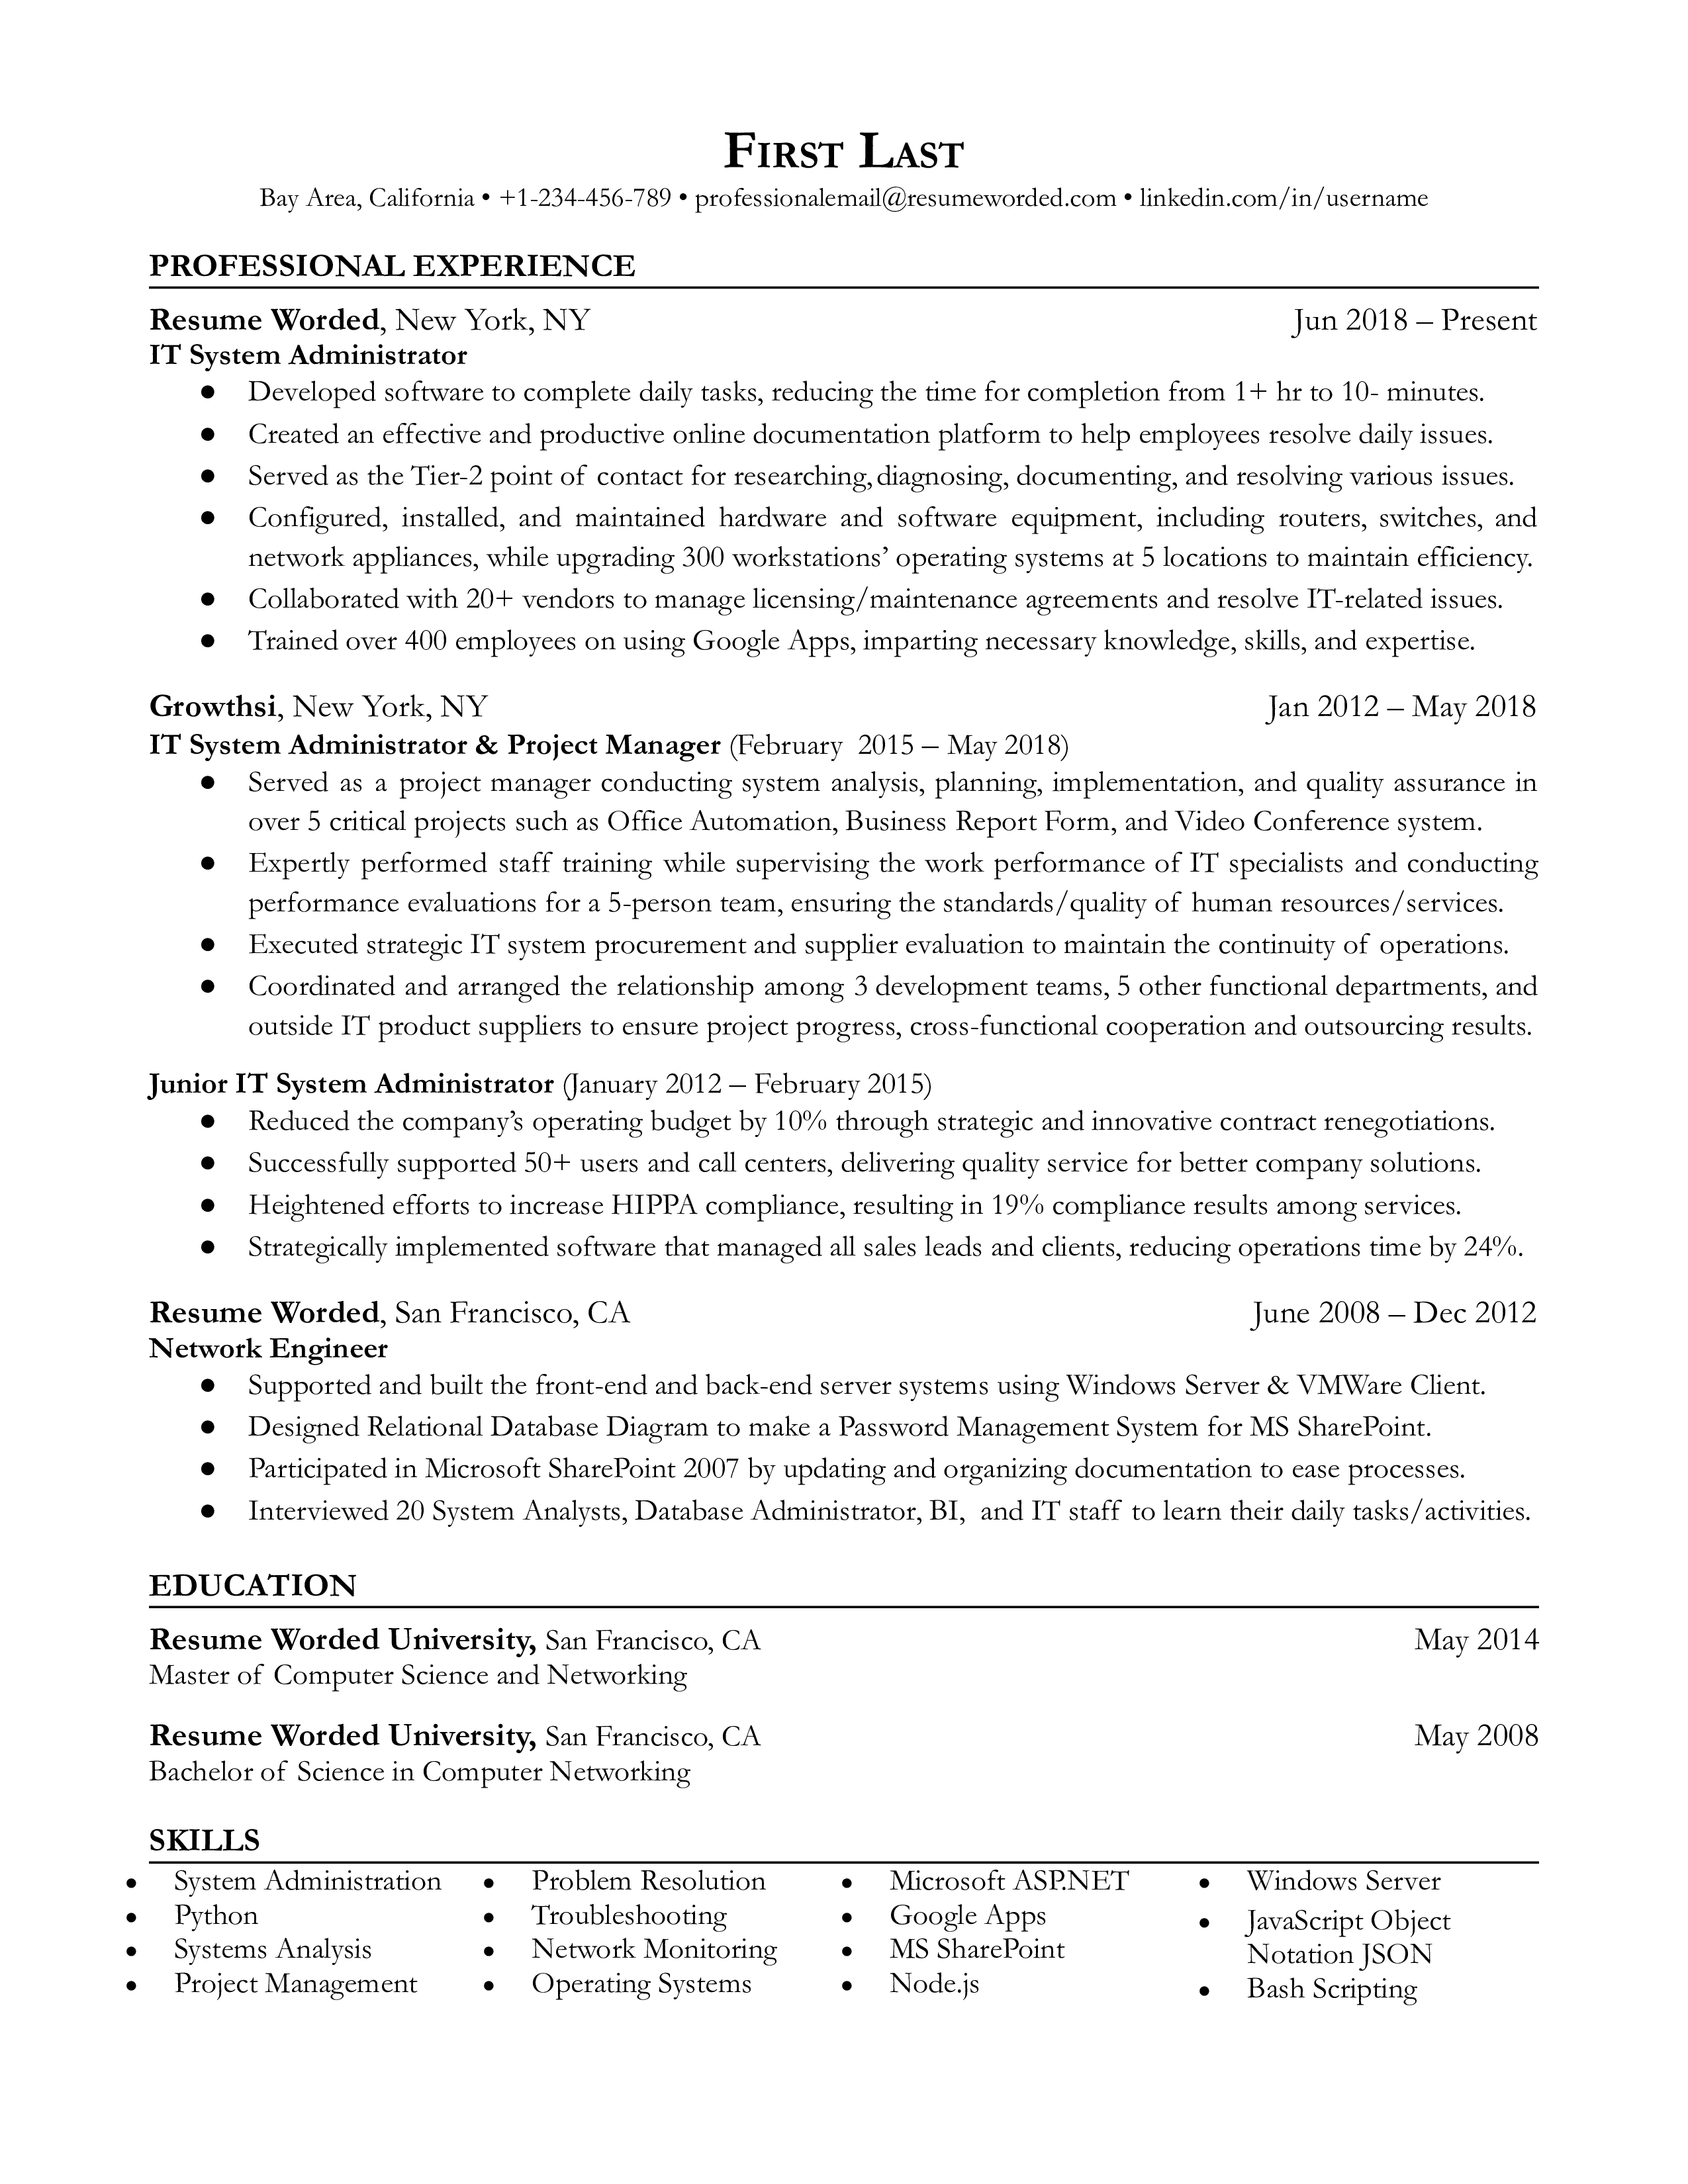 Screenshot of an IT System Administrator's resume showcasing certifications and problem-solving experiences.